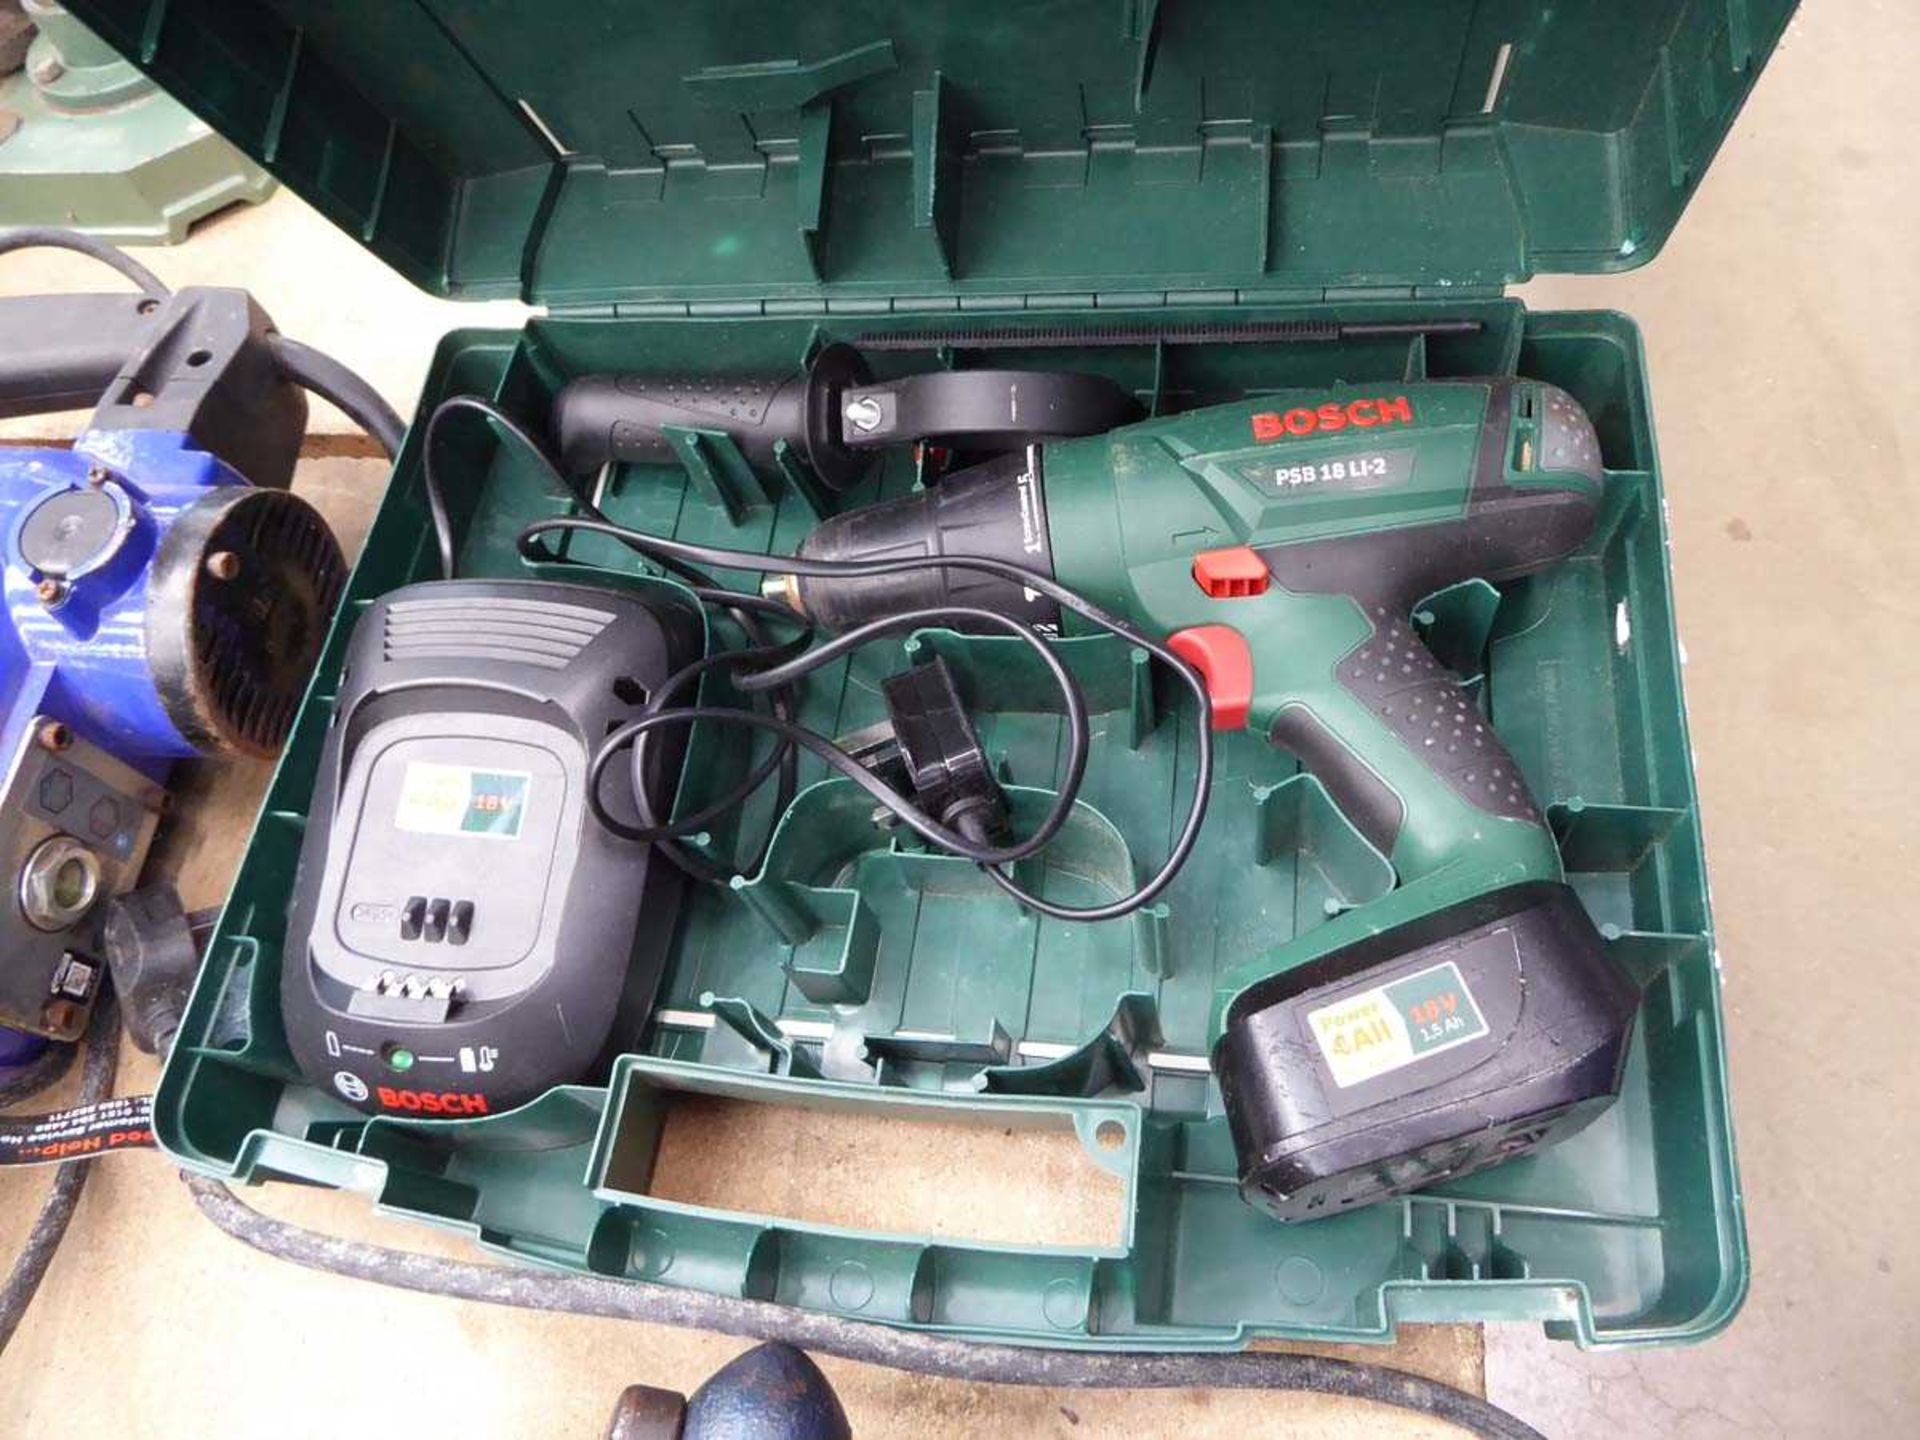 Bosch battery drill with one battery and charger